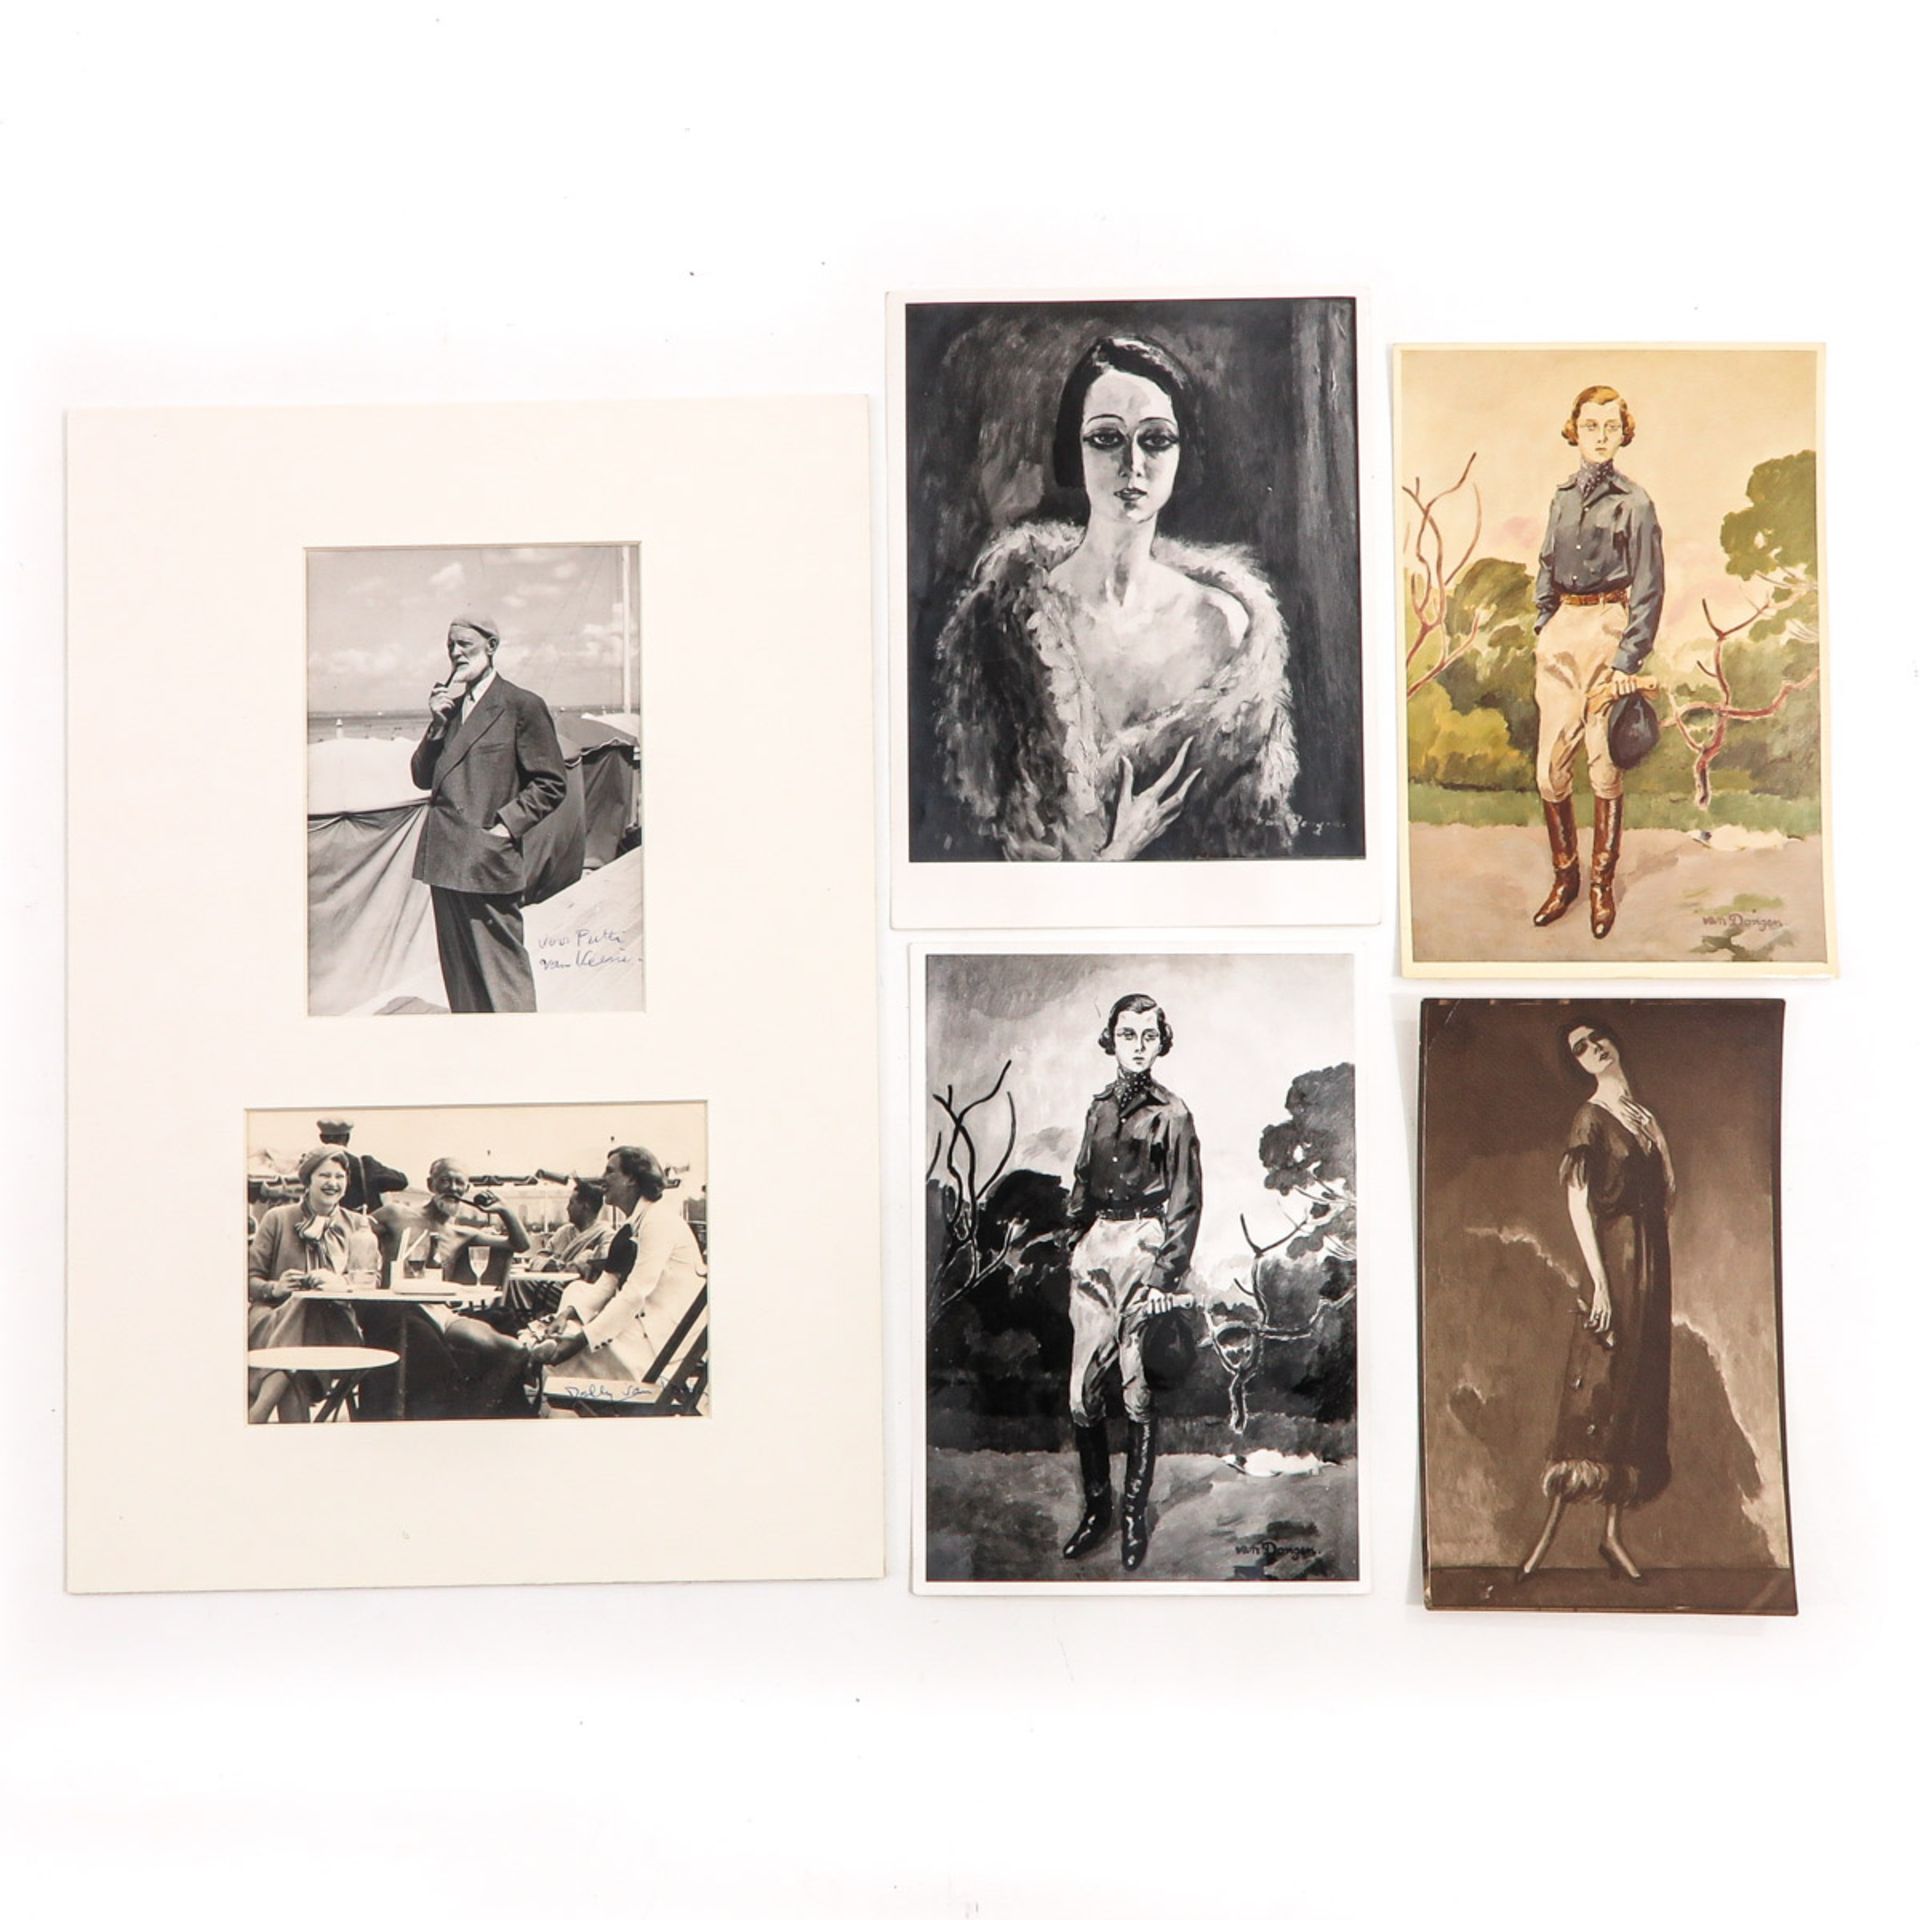 A Collection of Kees van Dongen Photographs